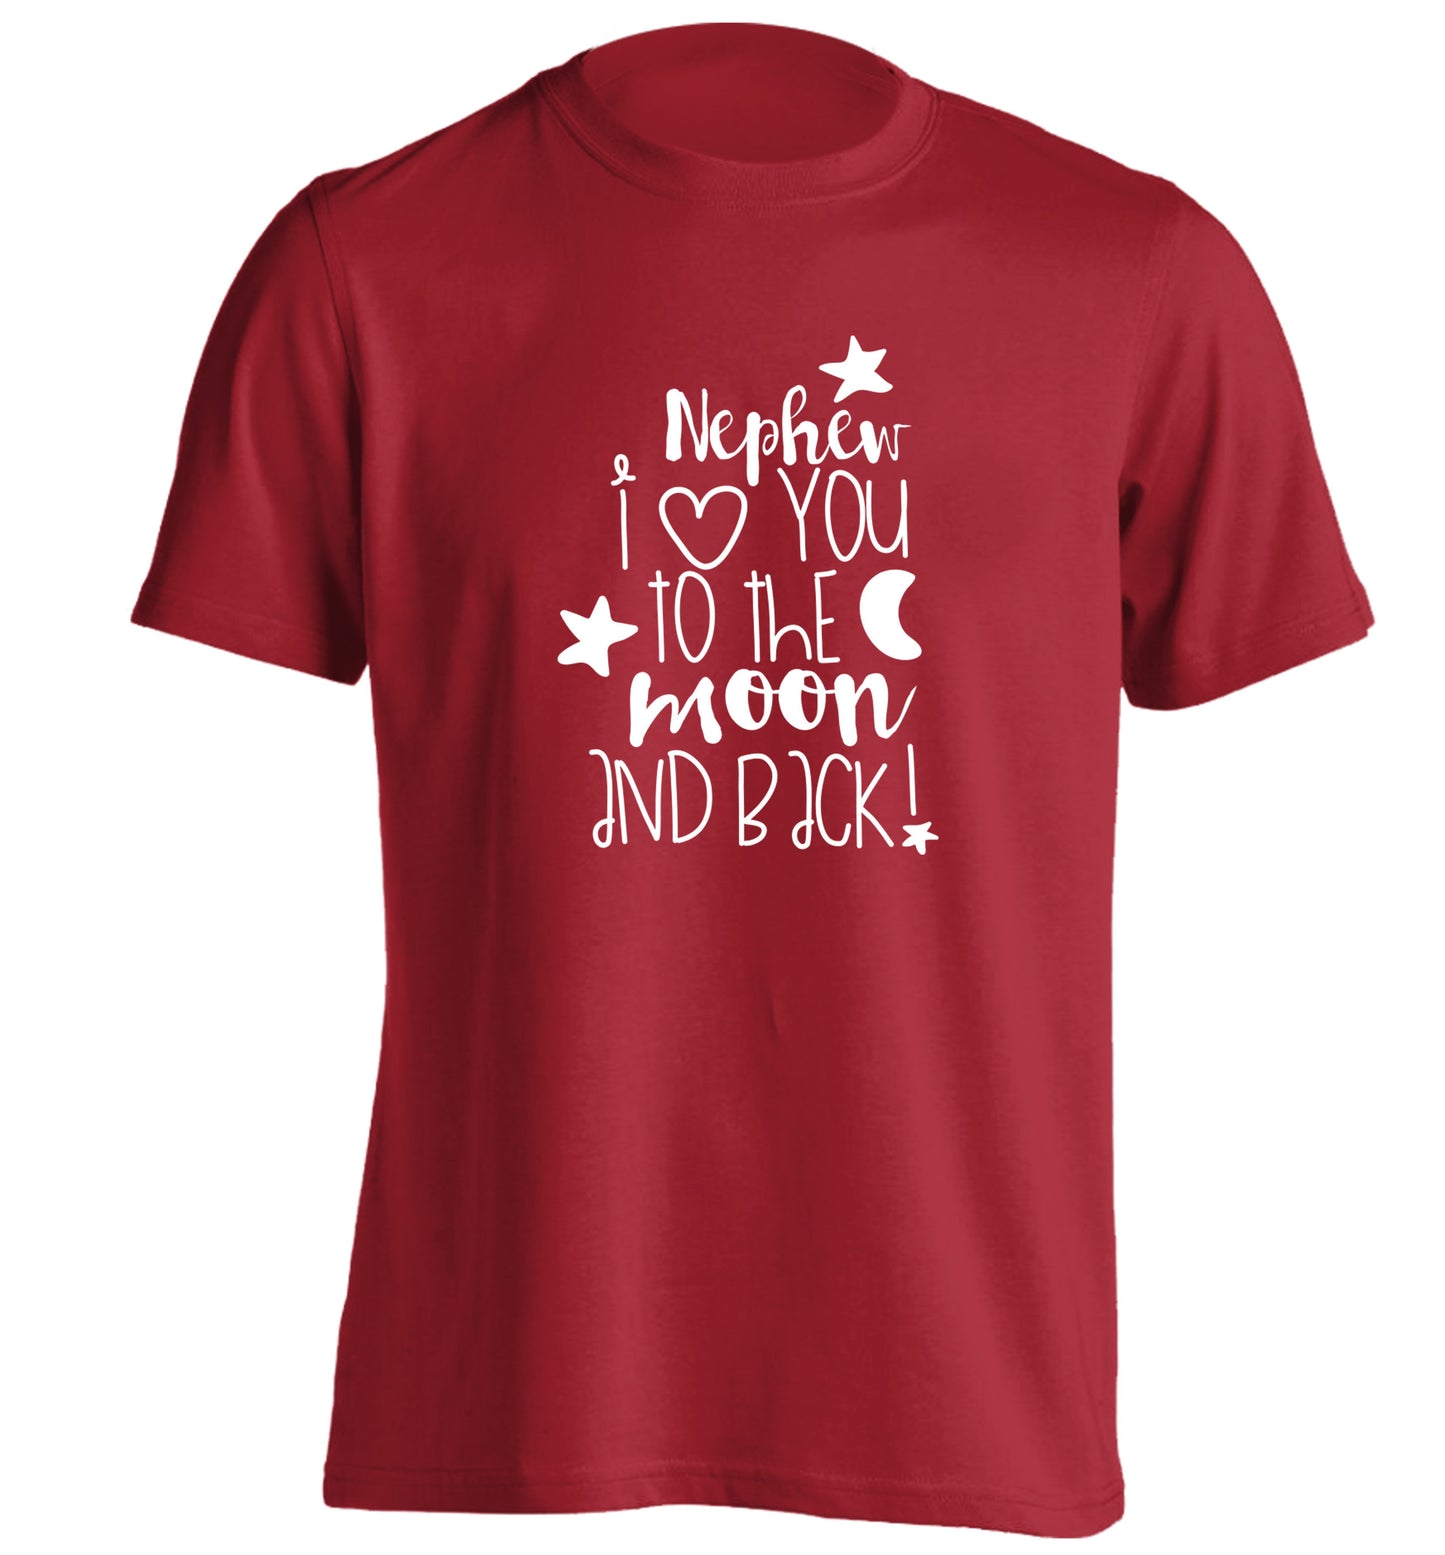 Nephew I love you to the moon and back adults unisex red Tshirt 2XL